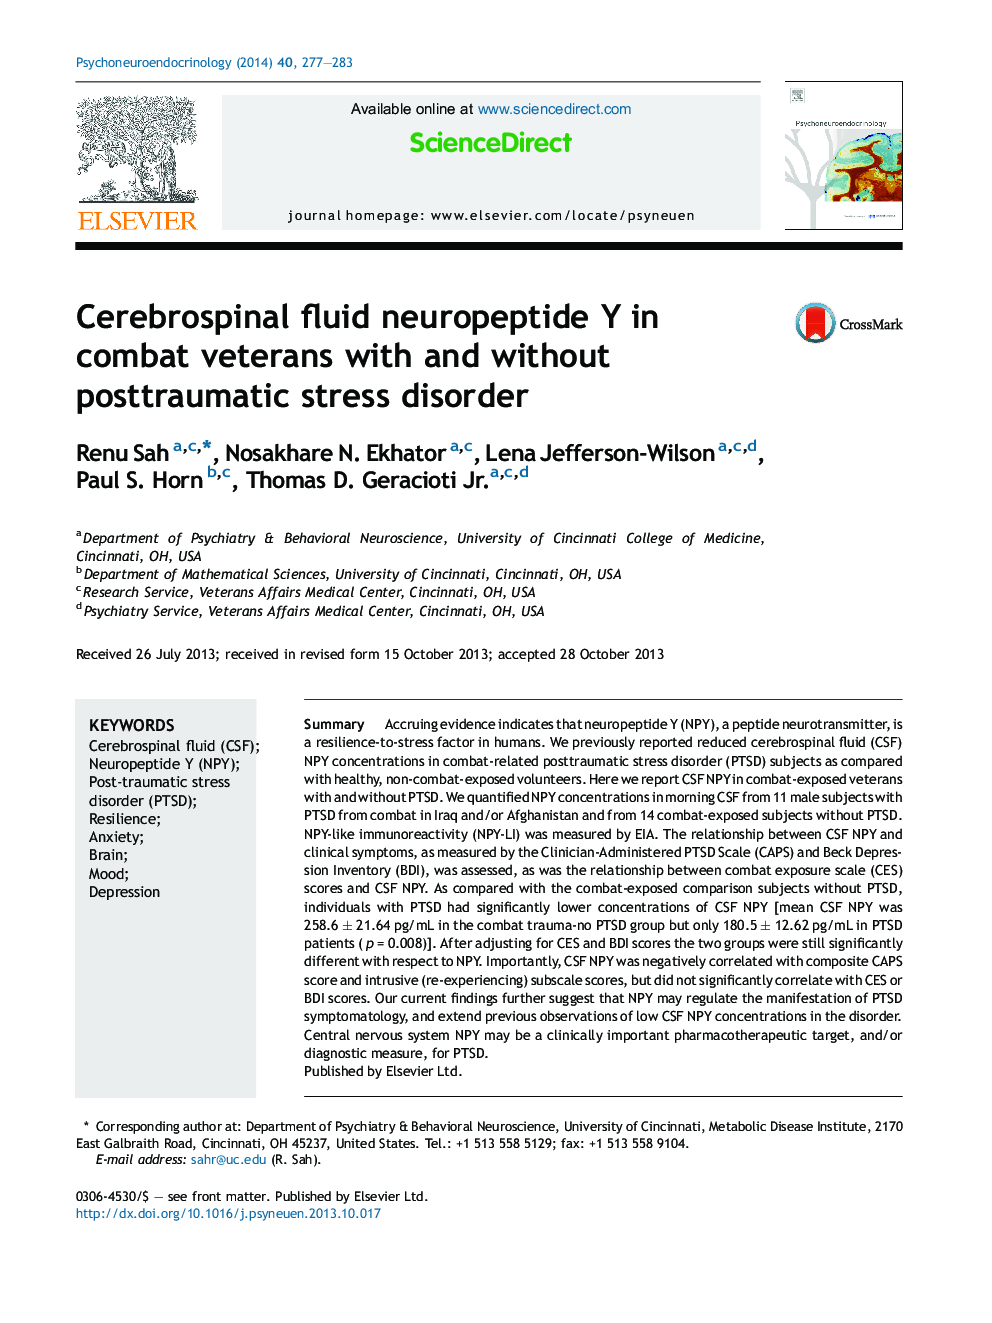 Cerebrospinal fluid neuropeptide Y in combat veterans with and without posttraumatic stress disorder